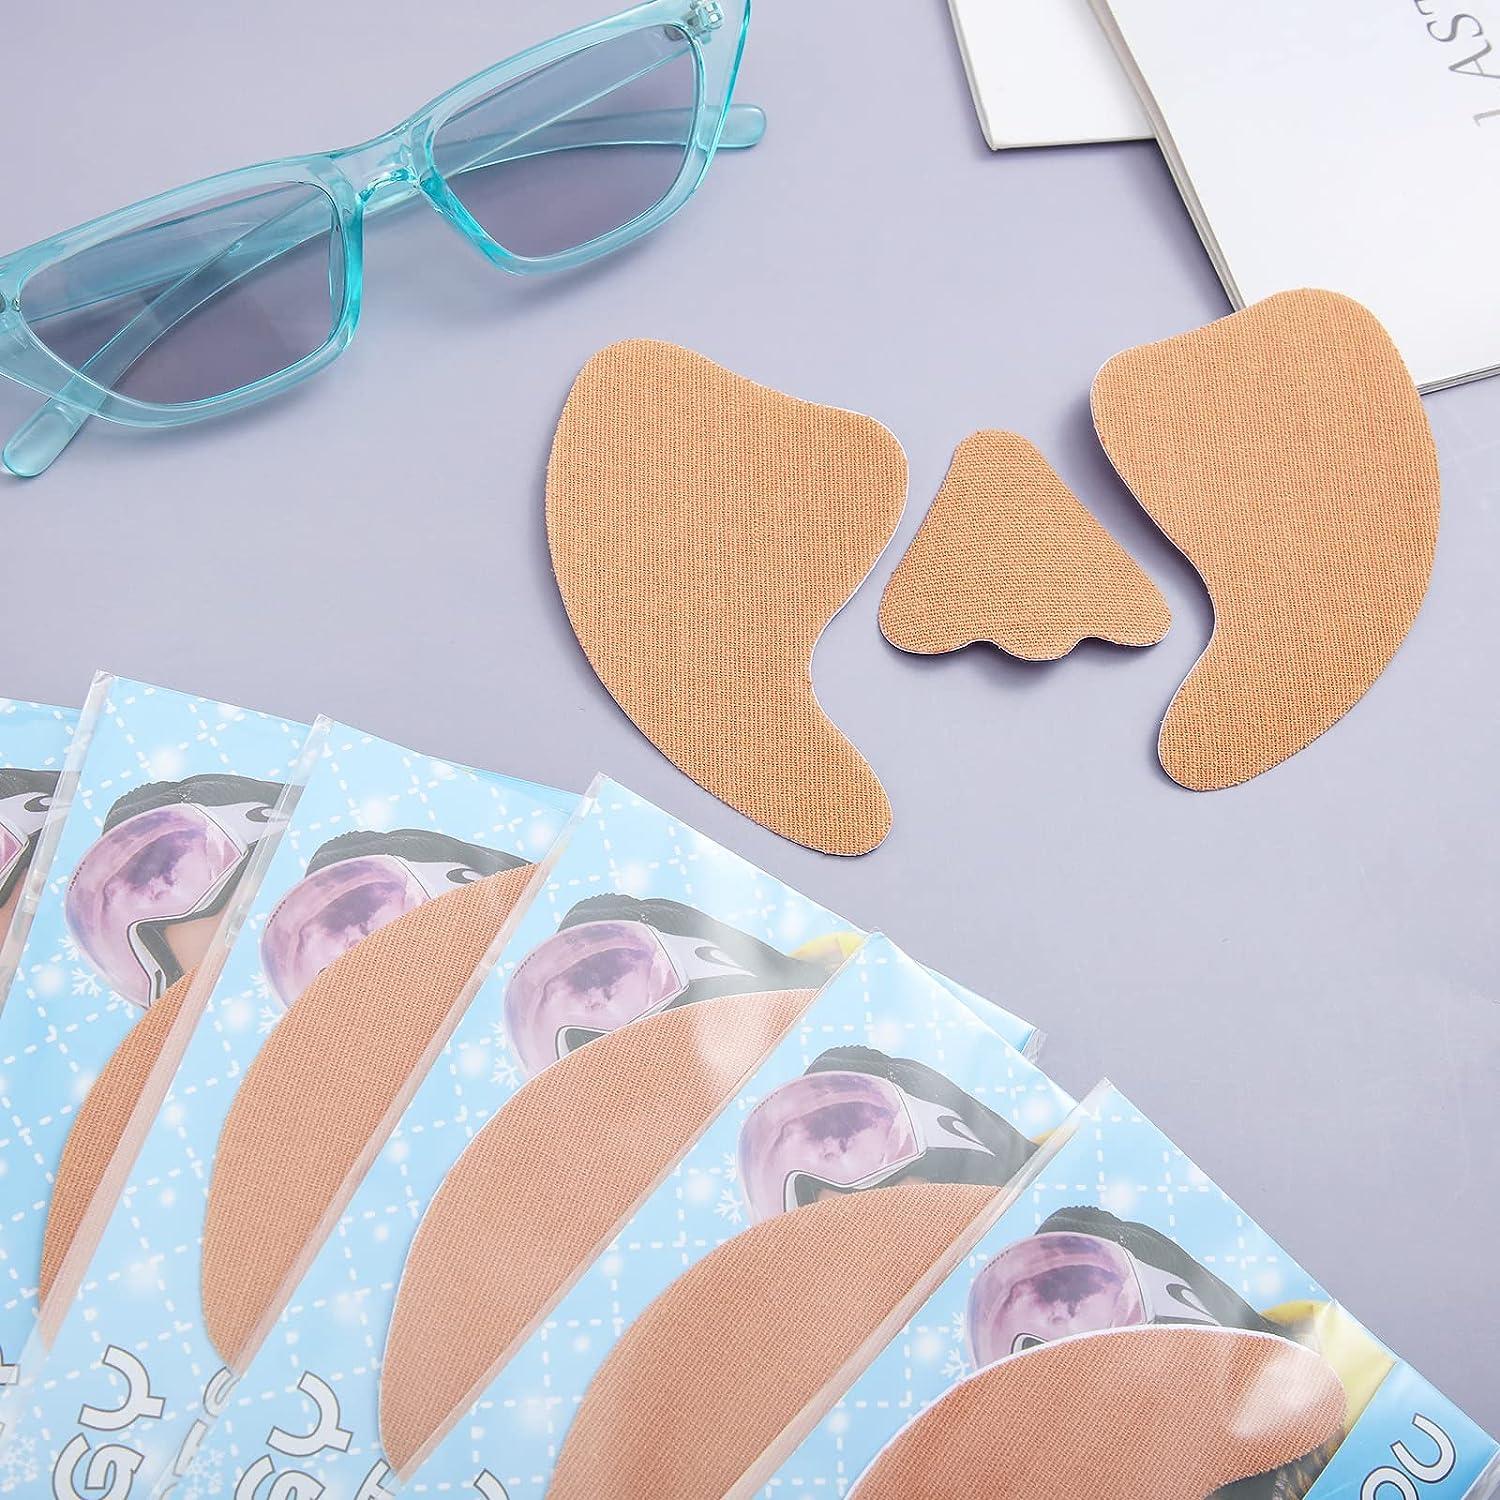 24pcs Sun Protection Nose Patch Outdoor Uv Protection Nose Cover  Skin-friendly Sun Nose Sticker